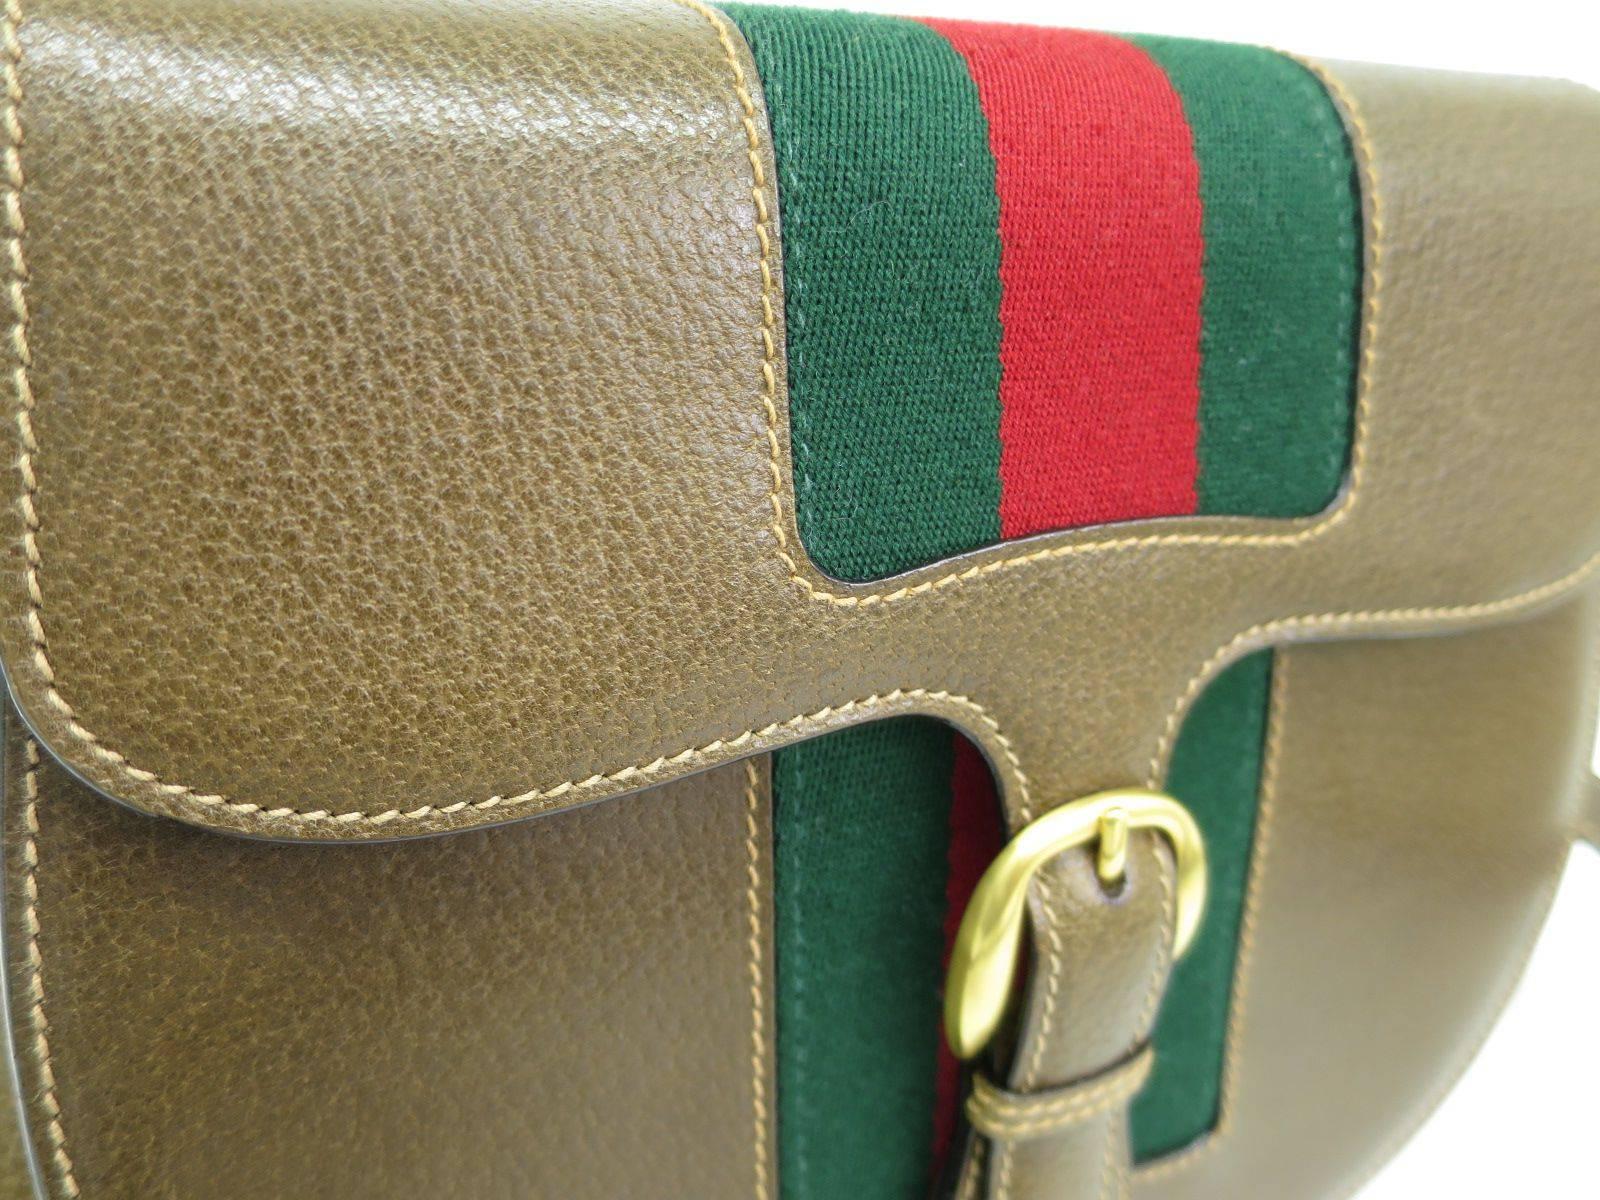 CURATOR'S NOTES

Where the crossbody bag trend began! Chic vintage Gucci leather cross body featuring signature Gucci insignia down the middle.

Leather
Gold hardware
Leather lining
Flap closure
Made in Italy
Measures 9.8